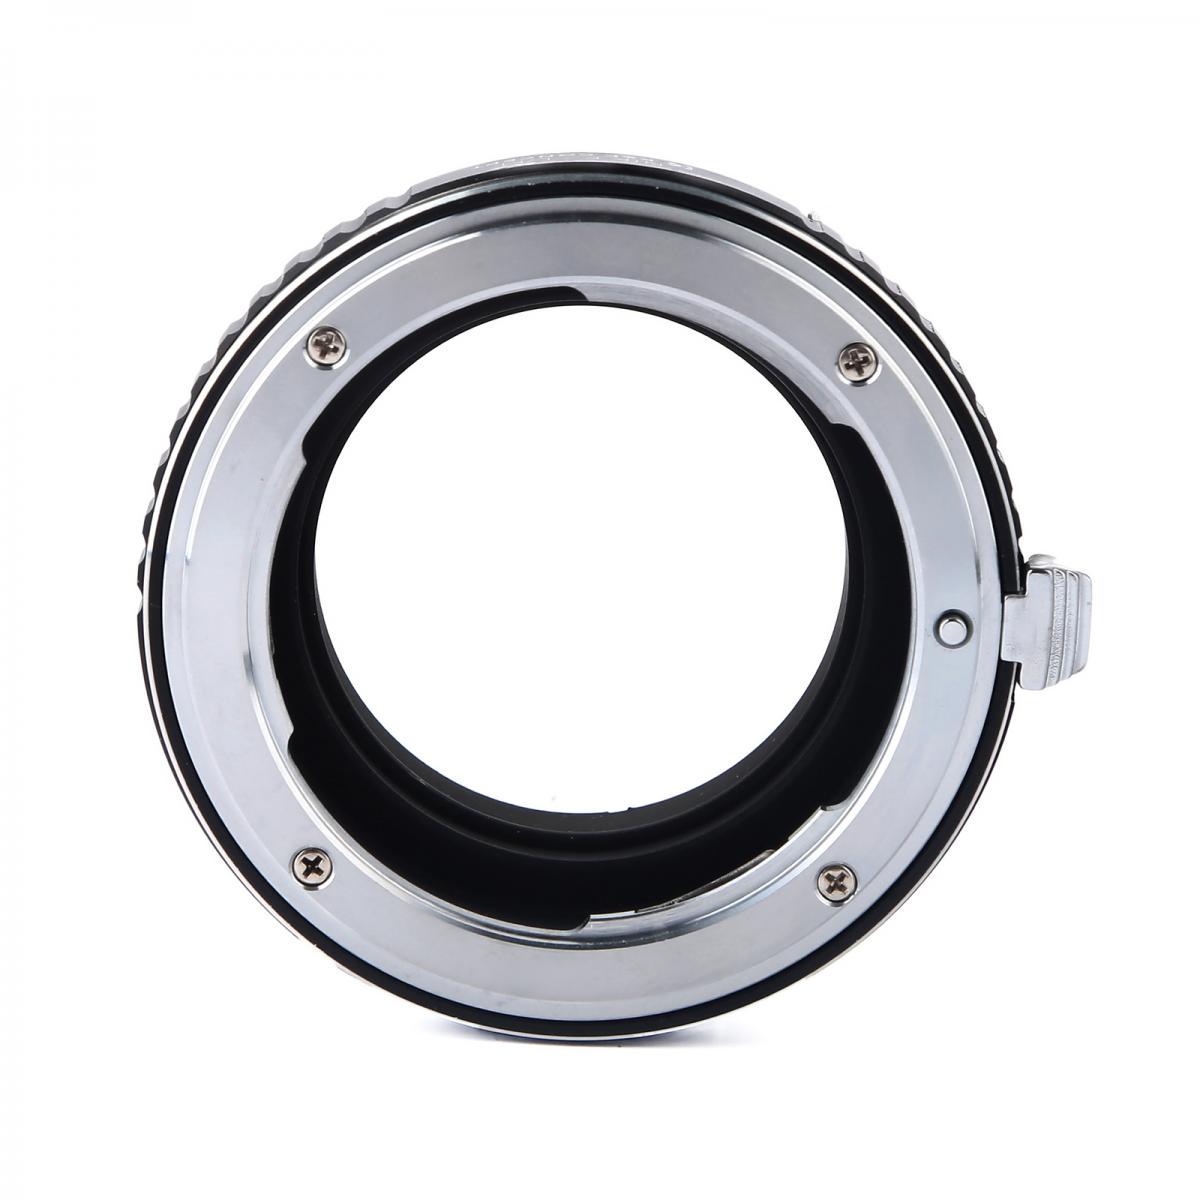 AI to L/M Adapter, Lens Mount Adapter Compatible with Nikon AI F Lens to Leica M Mount Camera Body 